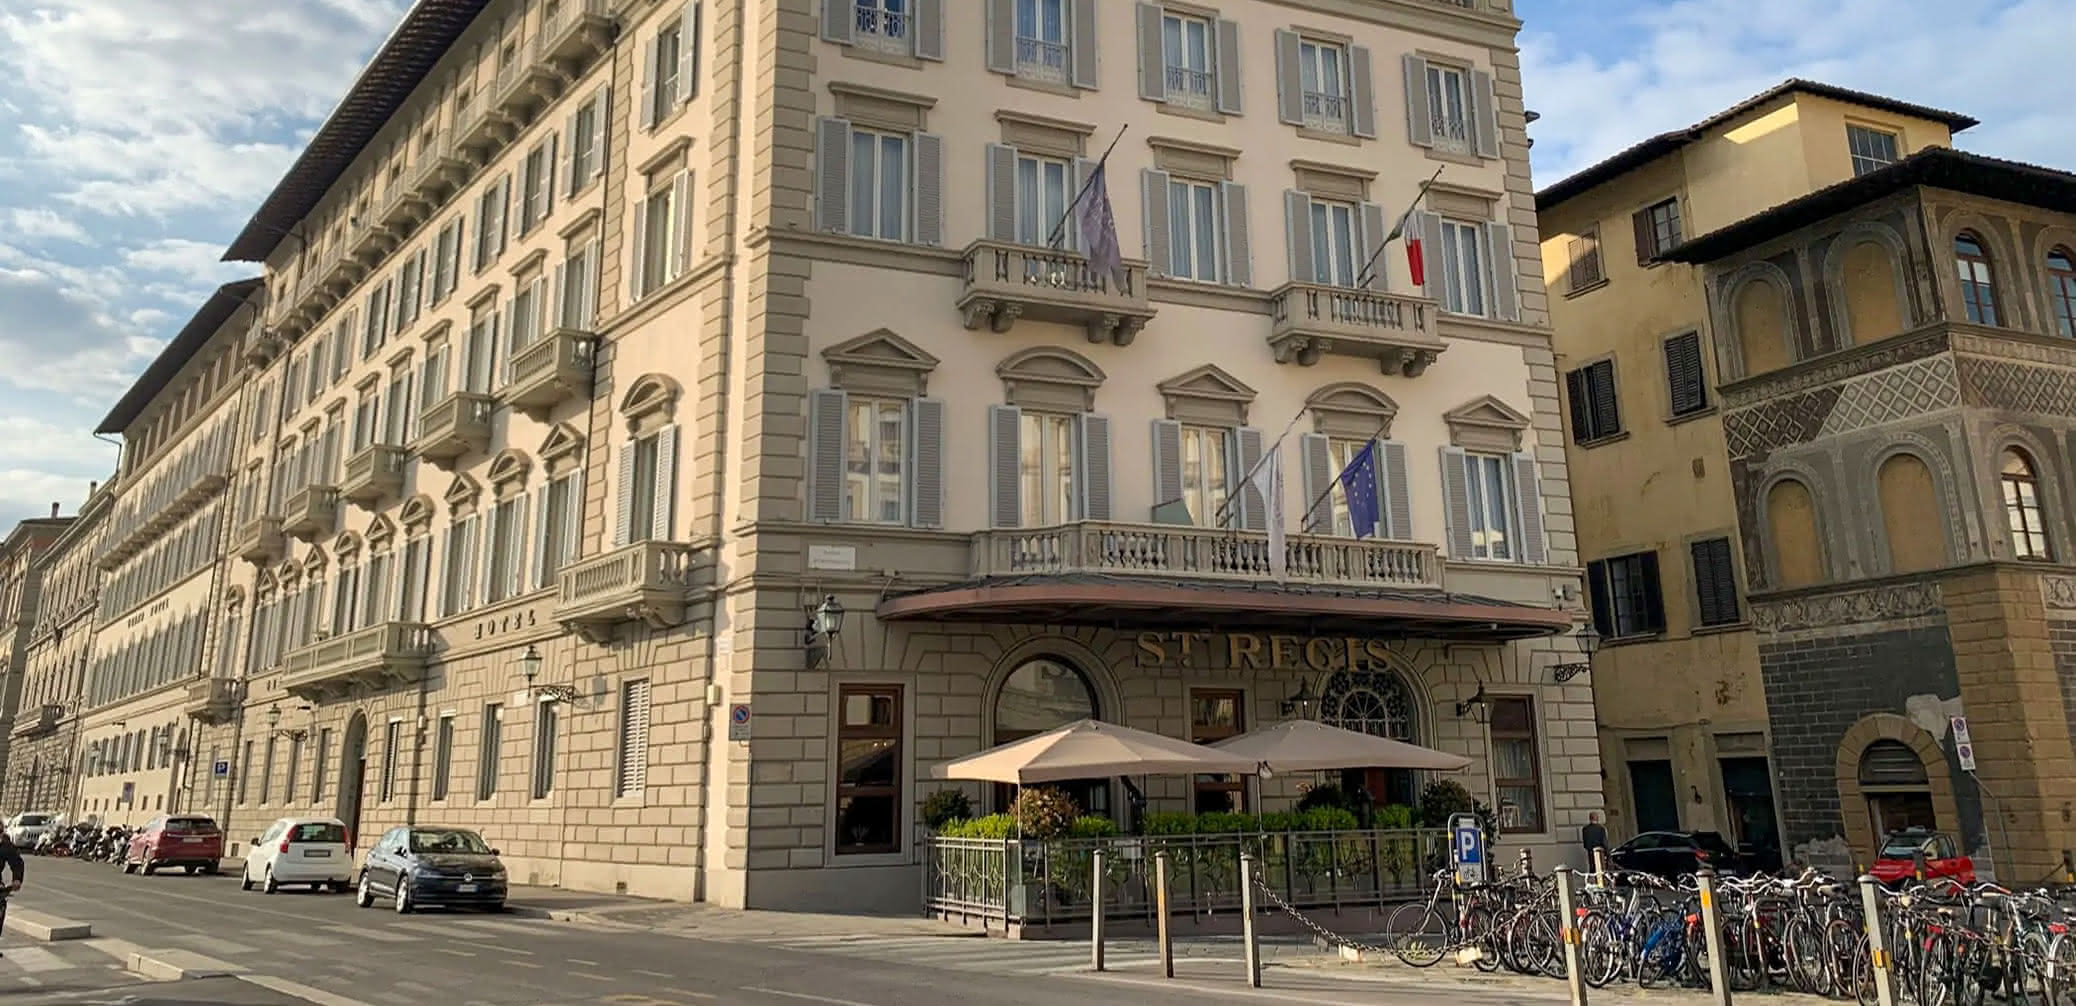 Cheapest Marriott Hotel In Florence